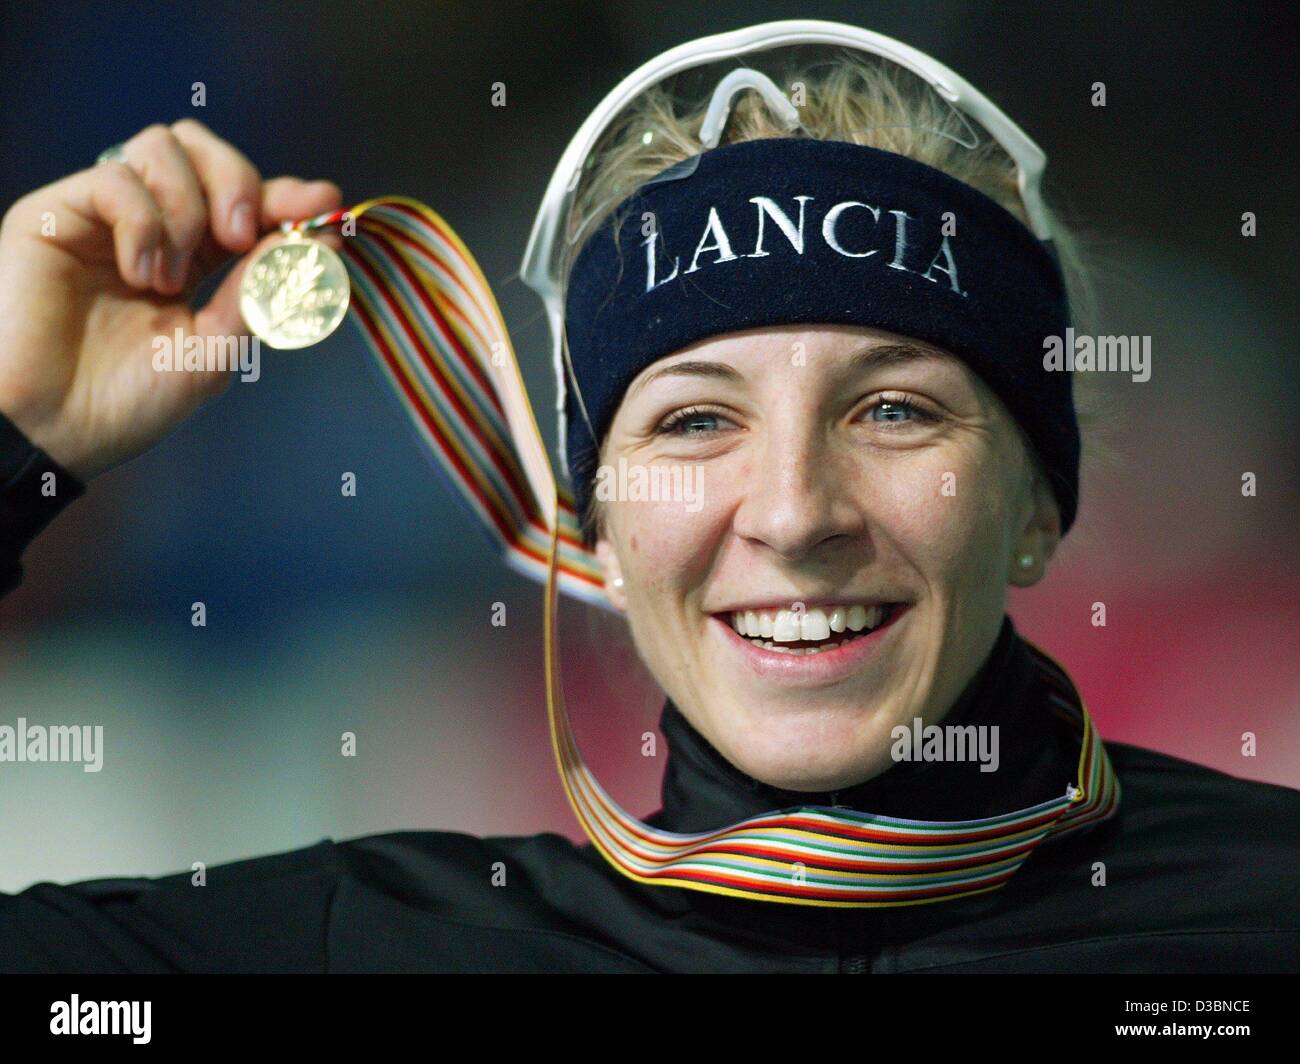 (dpa) - German speed skater Anni Friesinger smiles and gestures and presents her medal after speeding down the ice track in the women's 1500 meter race at the Speed Skating World Championship in Berlin, 14 March 2003. Friesinger runs the distance in 1:57,43 minutes and wins the world champion title. Stock Photo